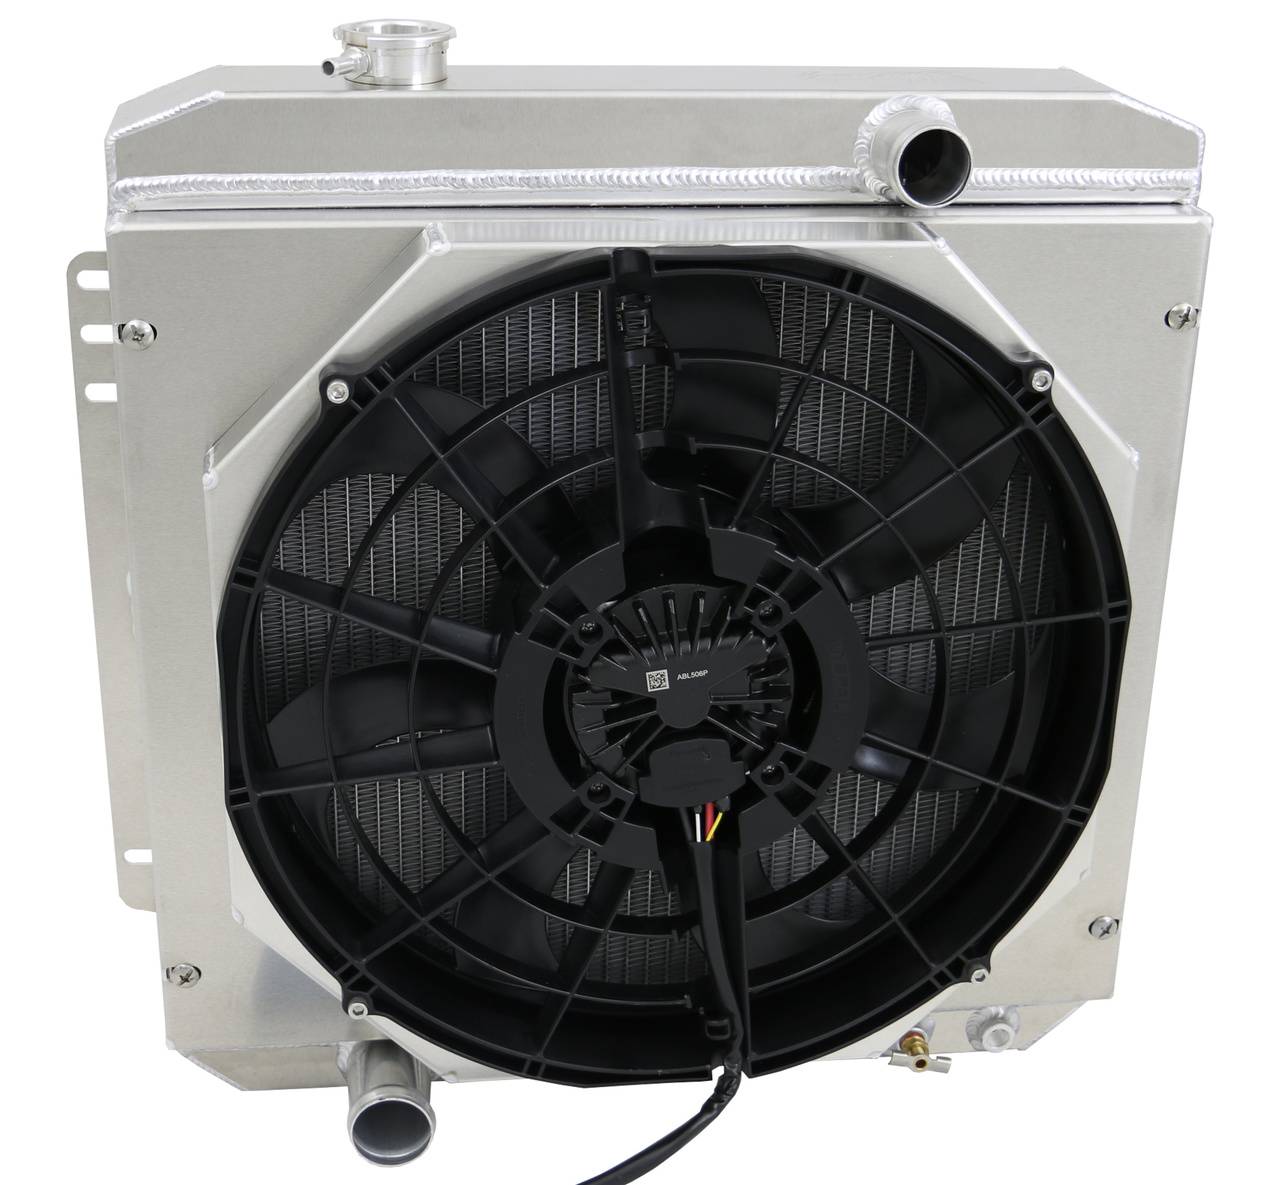 Wizard Cooling Inc - Wizard Cooling - 1962-1968 Ford Fairlane & 1966-70 Falcon Aluminum Radiator W/ Brushless Fan Shroud - 260-218BL